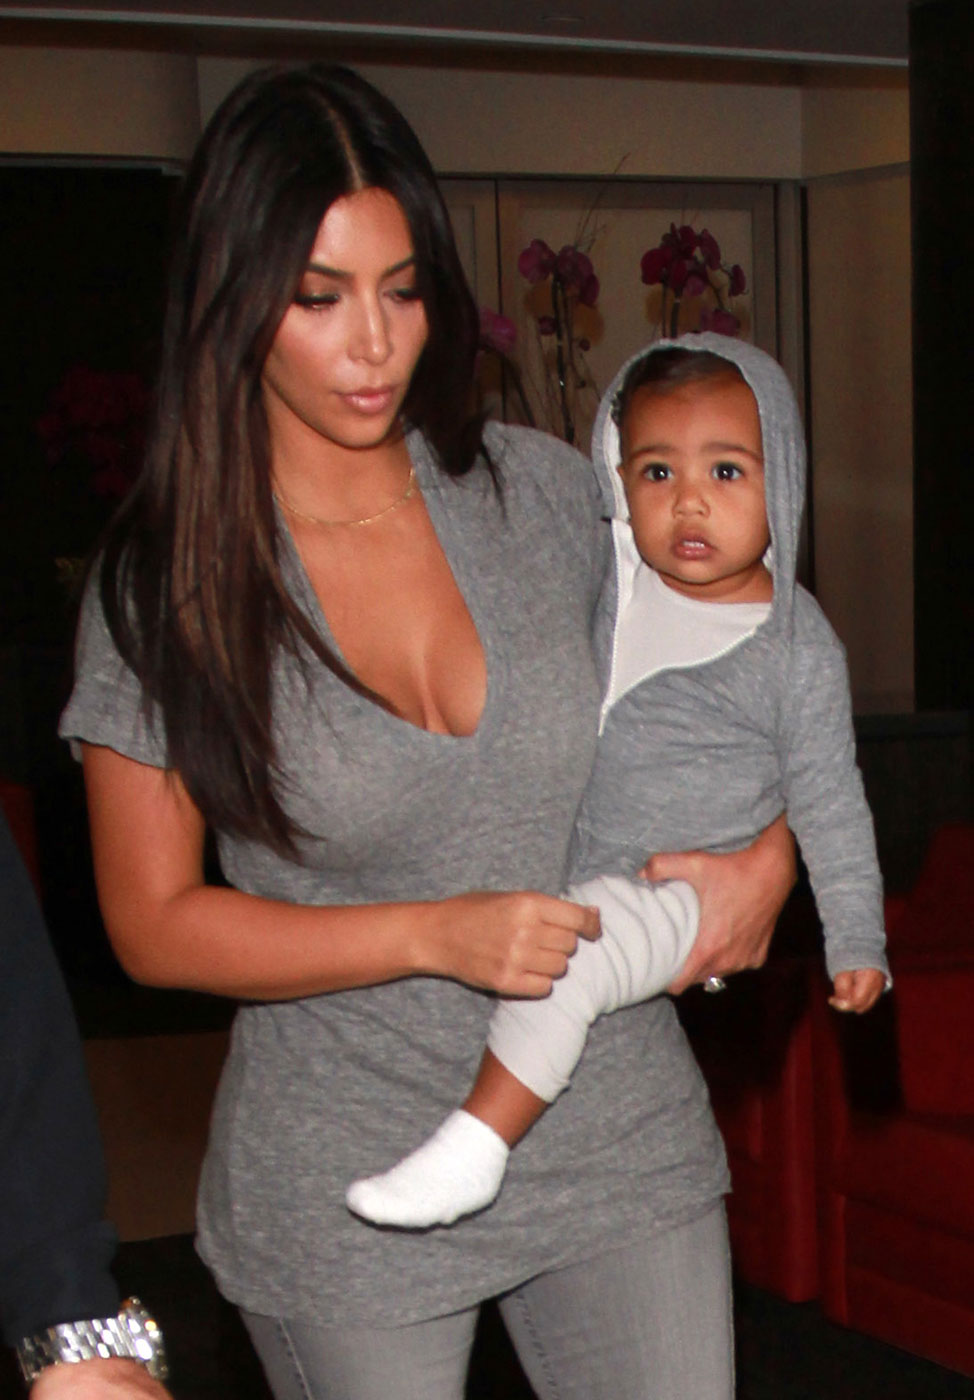 Kim Kardashian takes baby North West on late night flight from LAX Airport